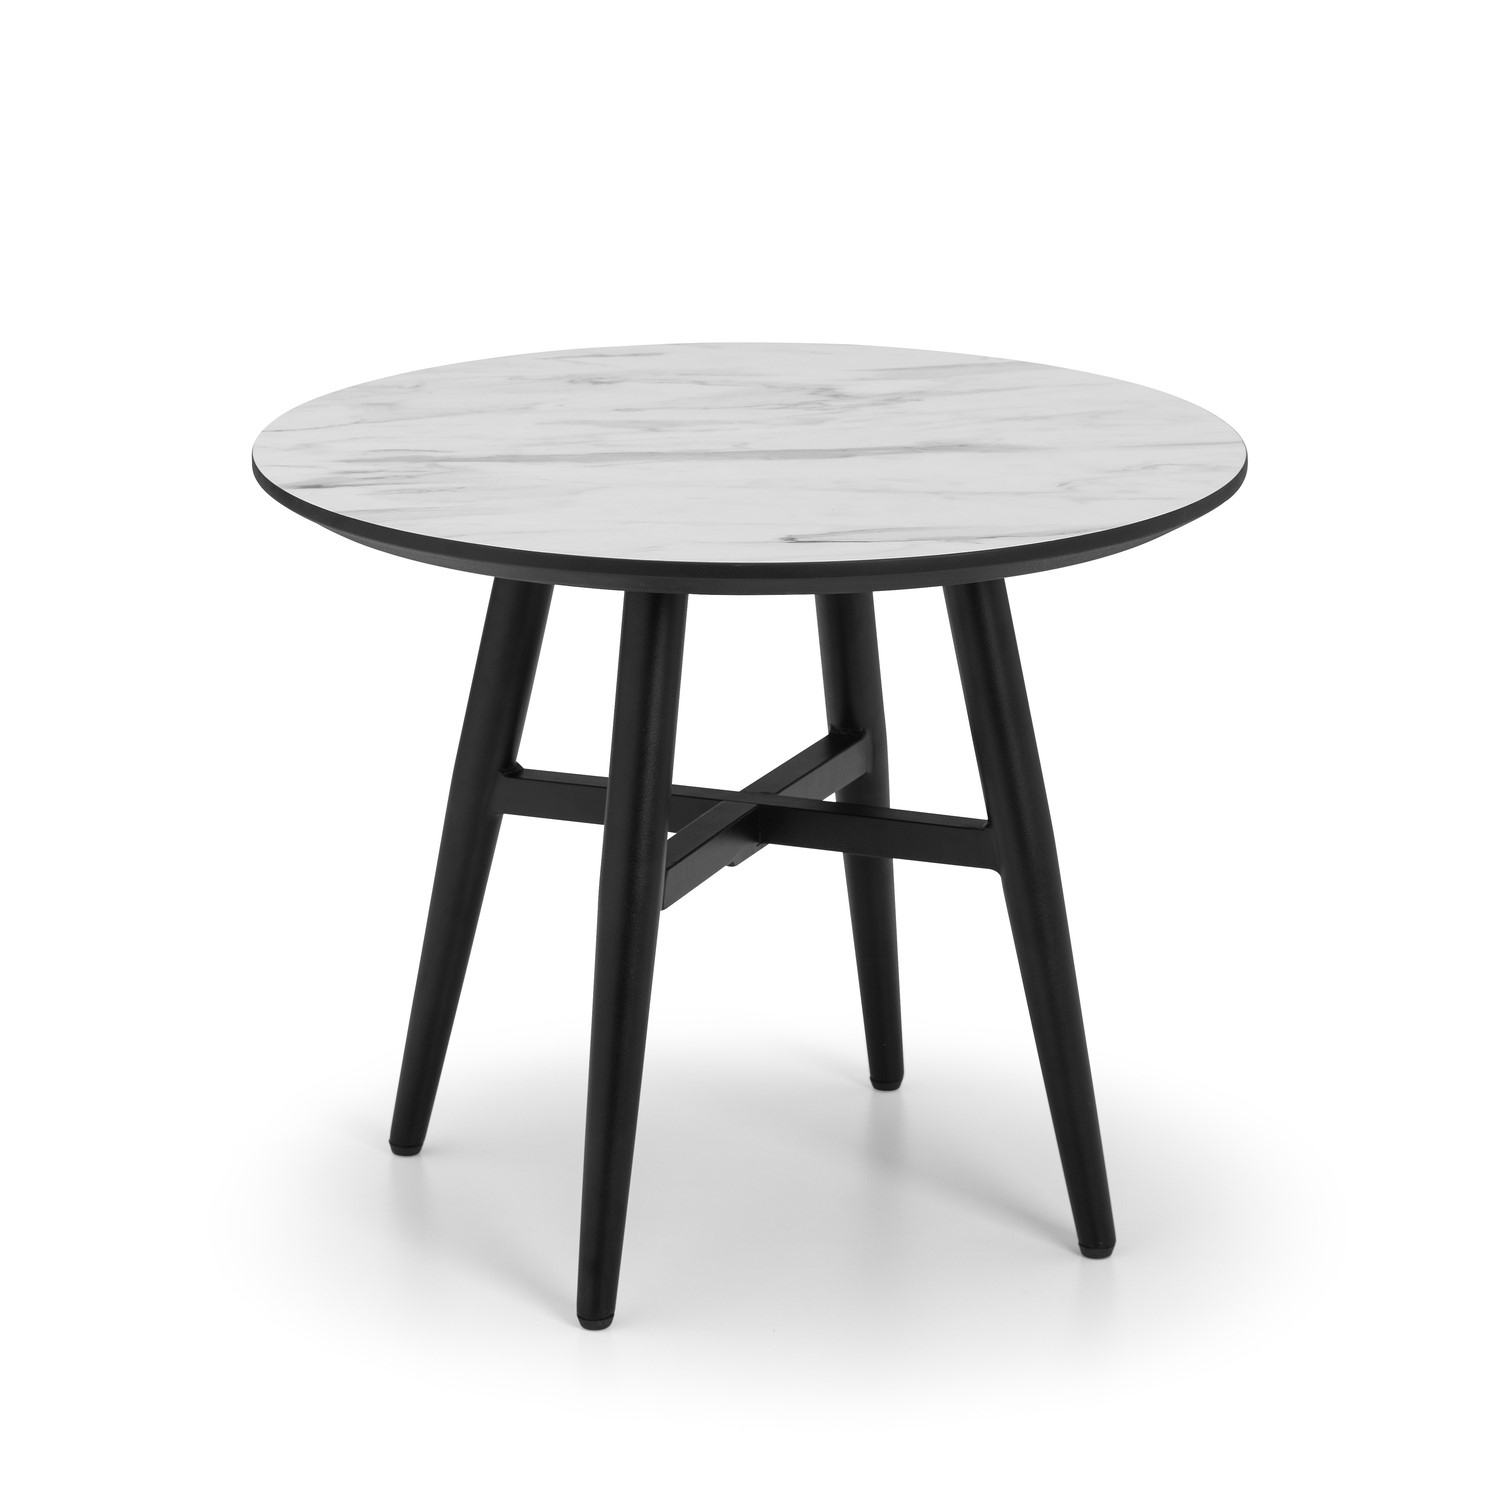 Round Side Table With Faux Marble Top, White Round Side Table Black Legs Wood Top